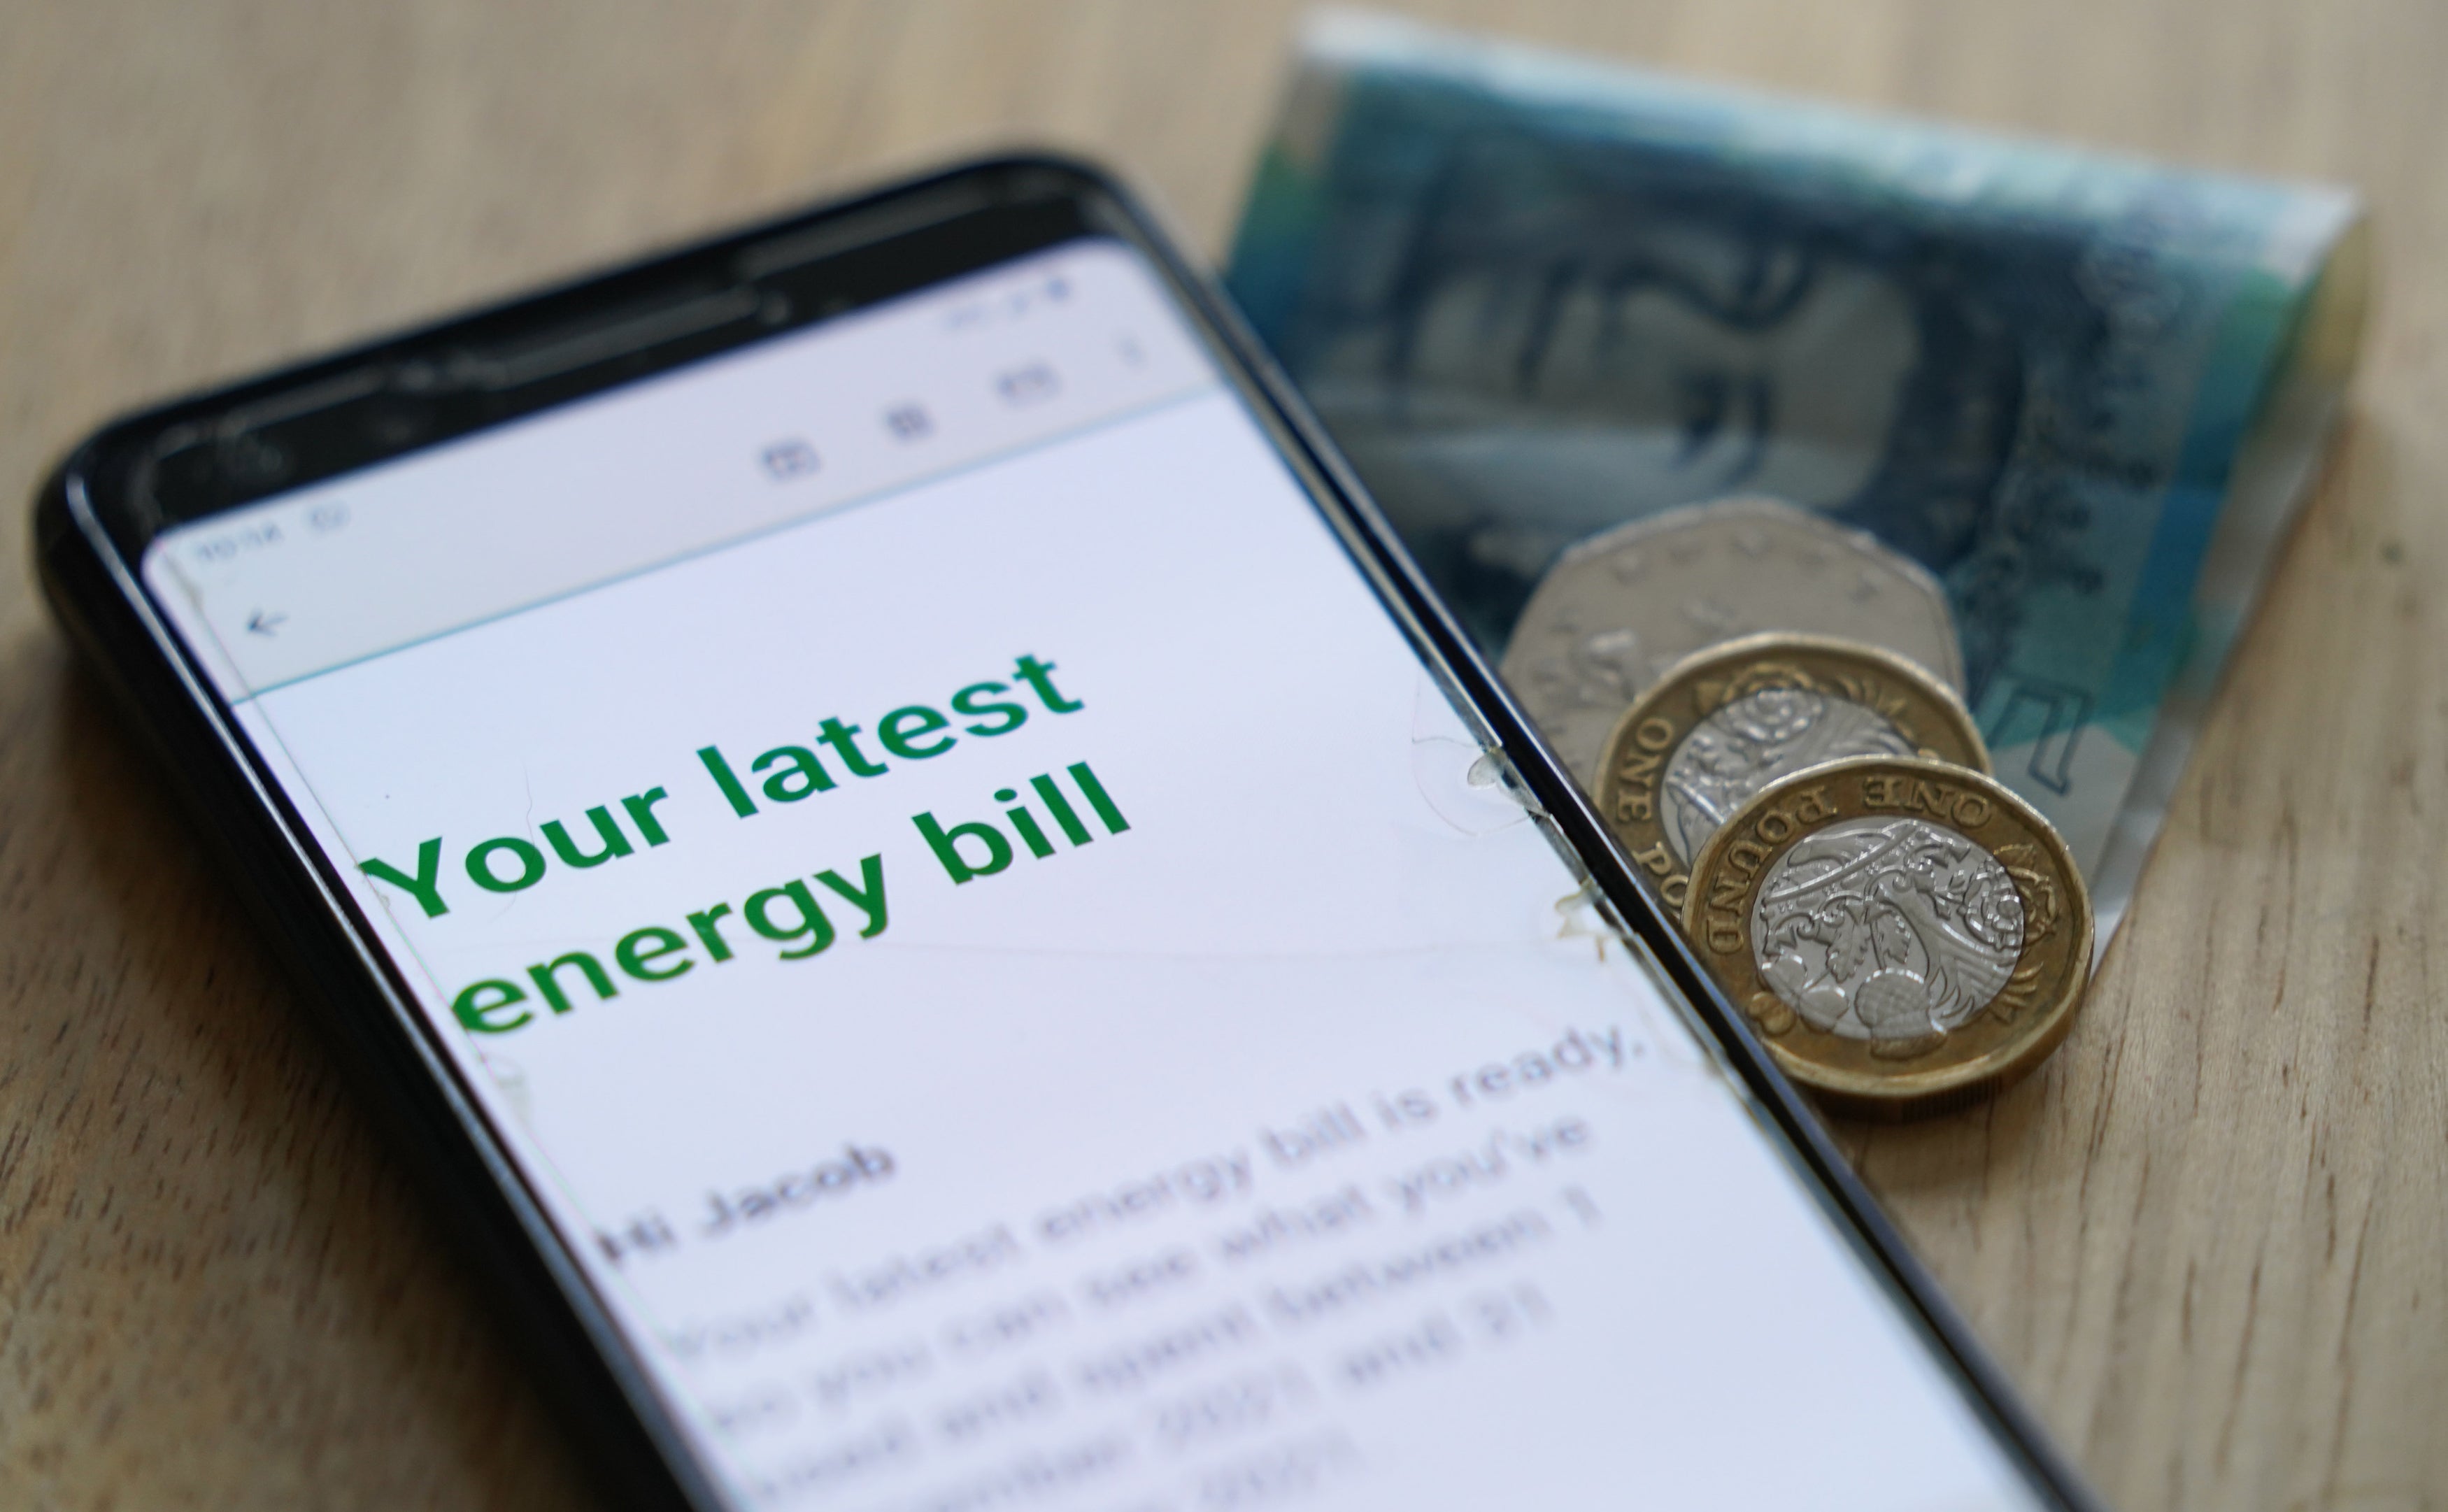 Energy bills shot up for 22 million households at the start of this month